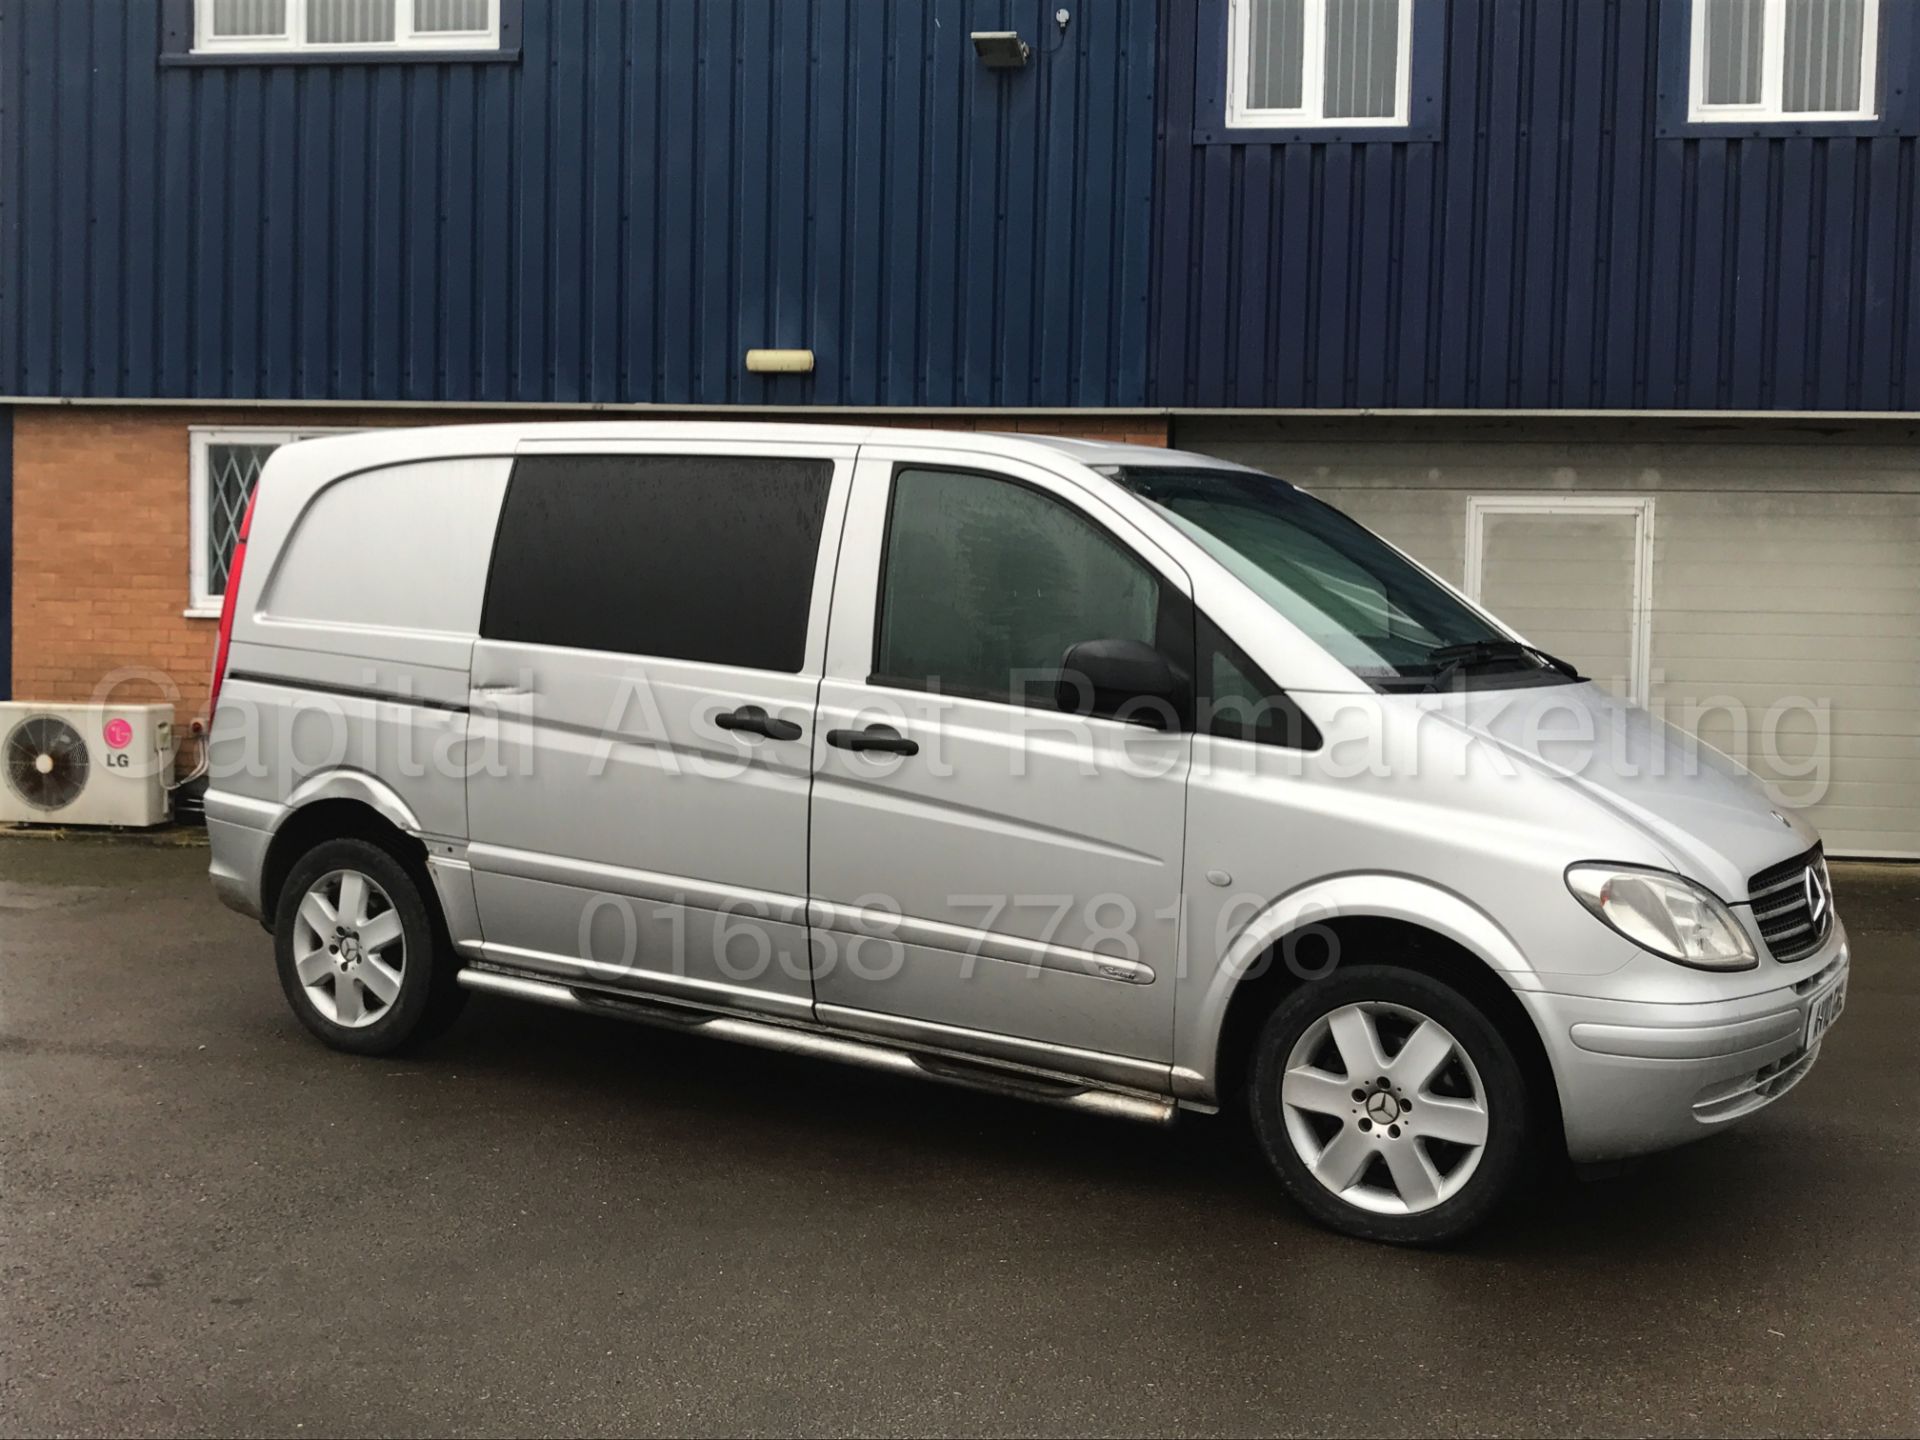 MERCEDES VITO *SPORT* '5 SEATER DUELINER' (2010 - 10 REG) '2.1 CDI - 150 BHP - 6 SPEED' **AIR CON** - Image 7 of 35